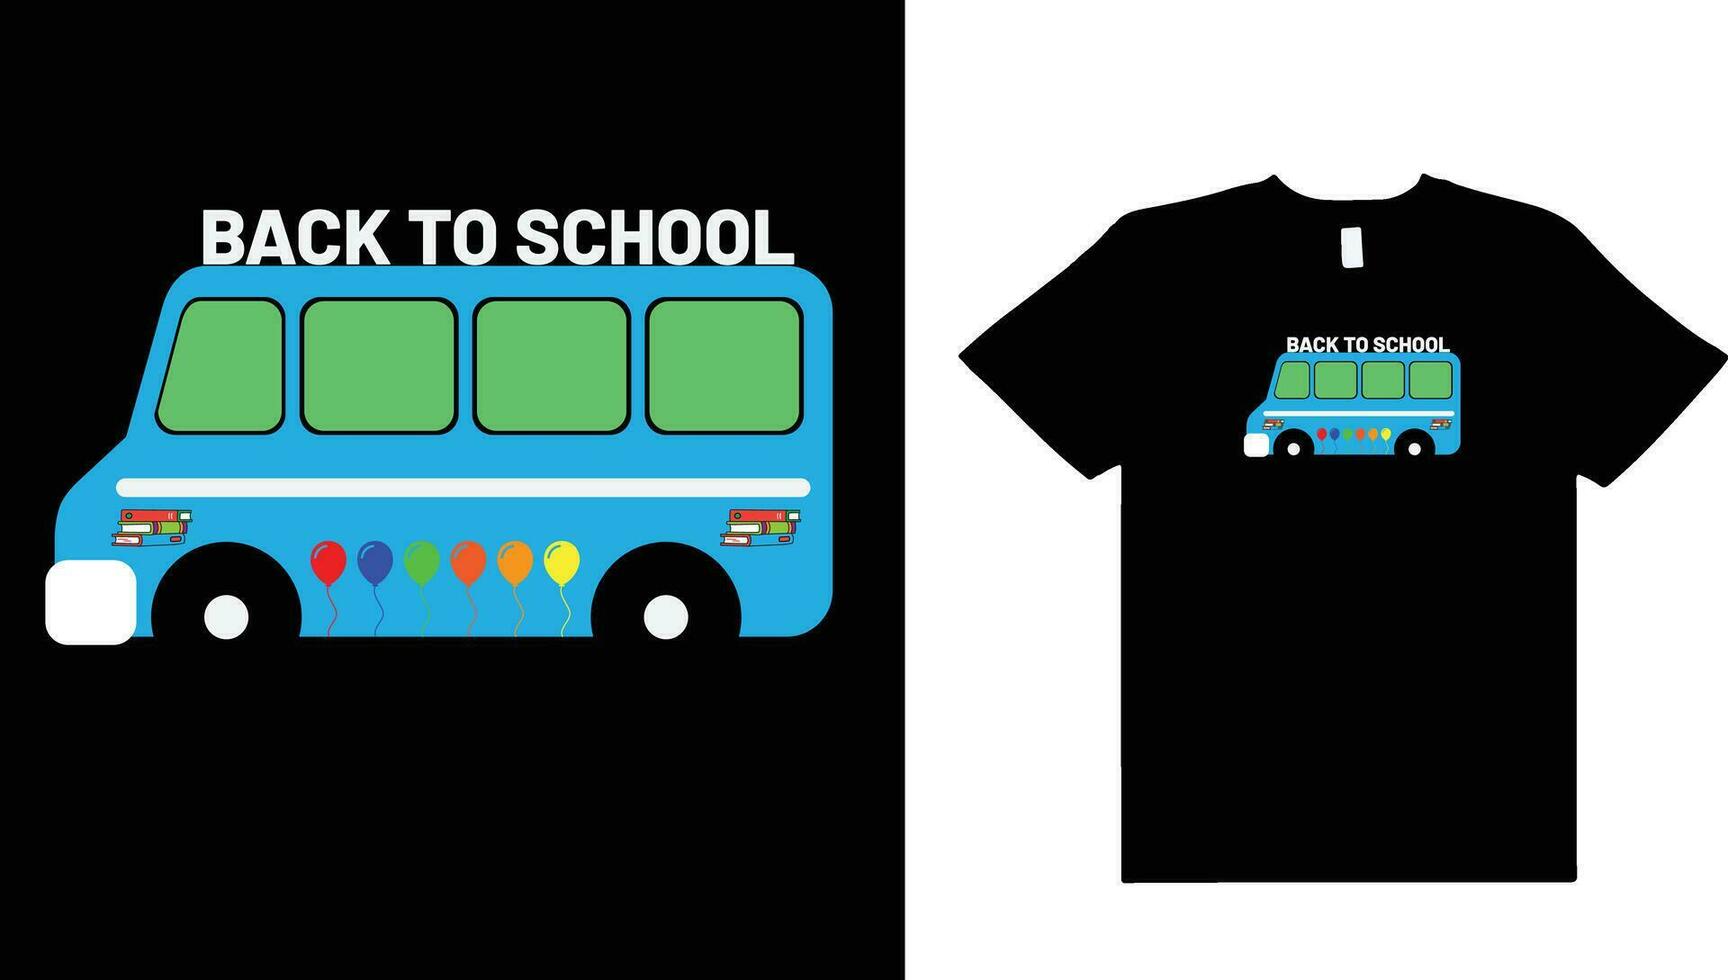 welcome back to school typography t shirt design - back to school t-shirt design. vector